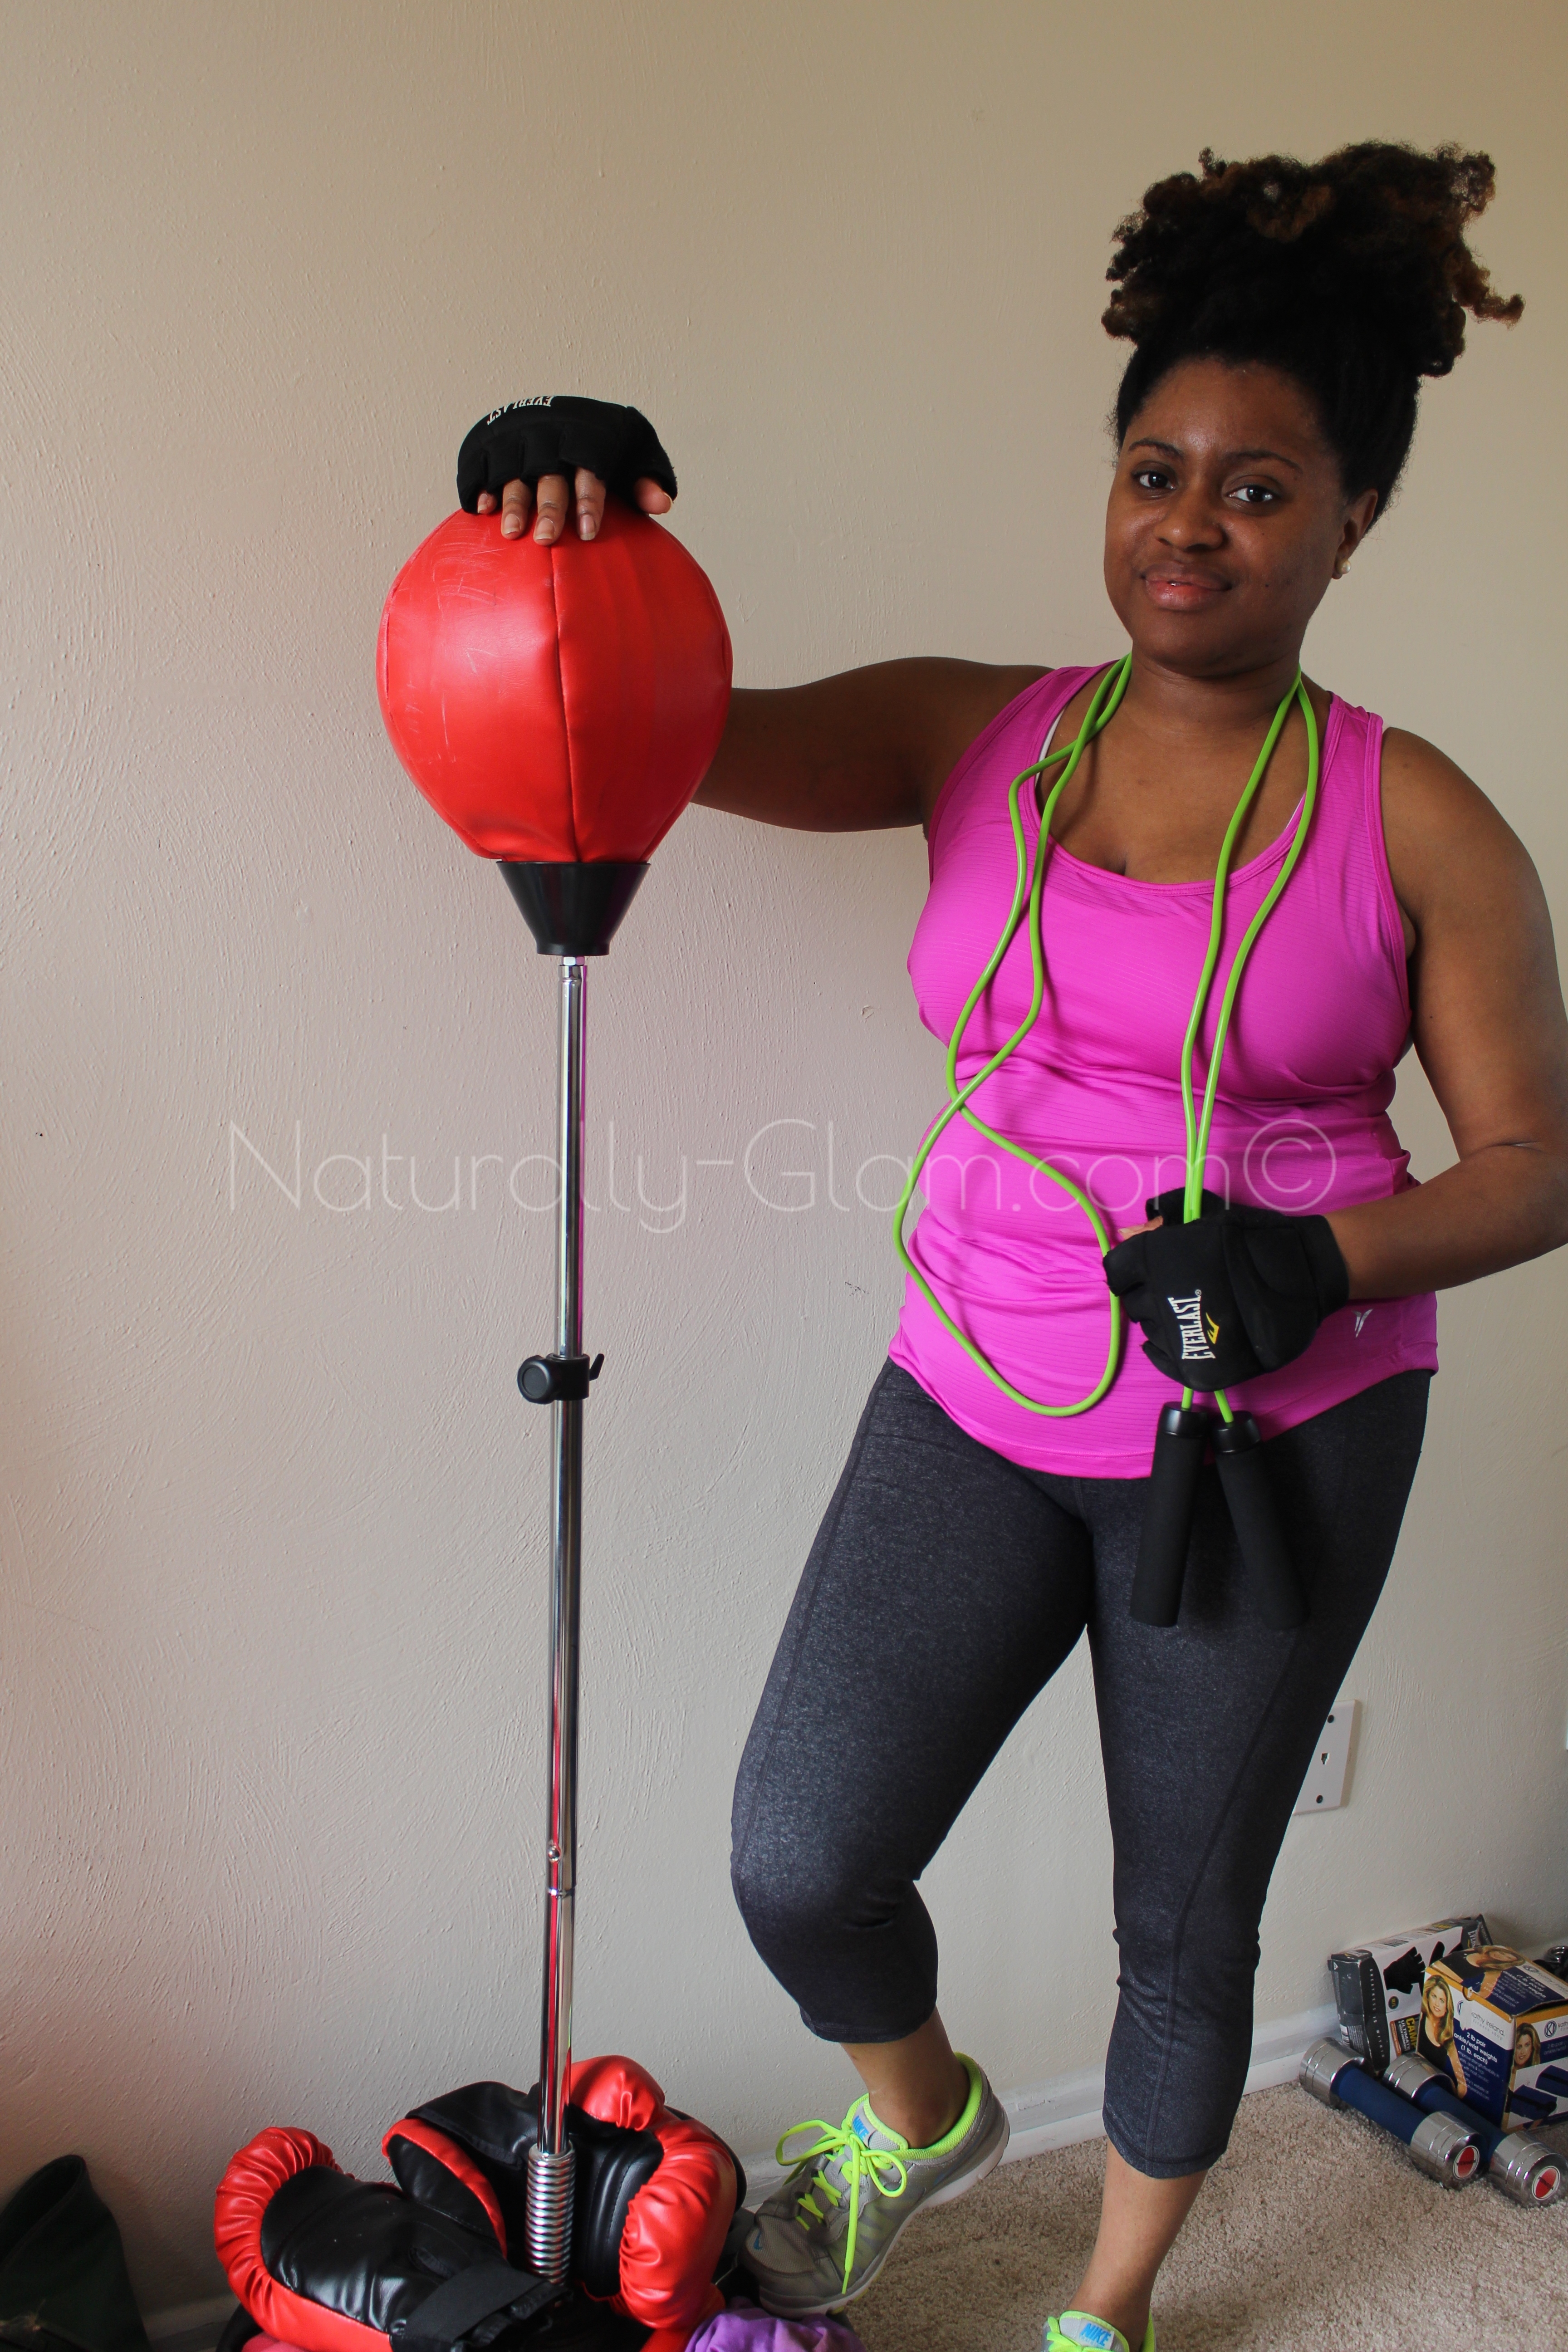 Boxing, weighted gloves, jump rope